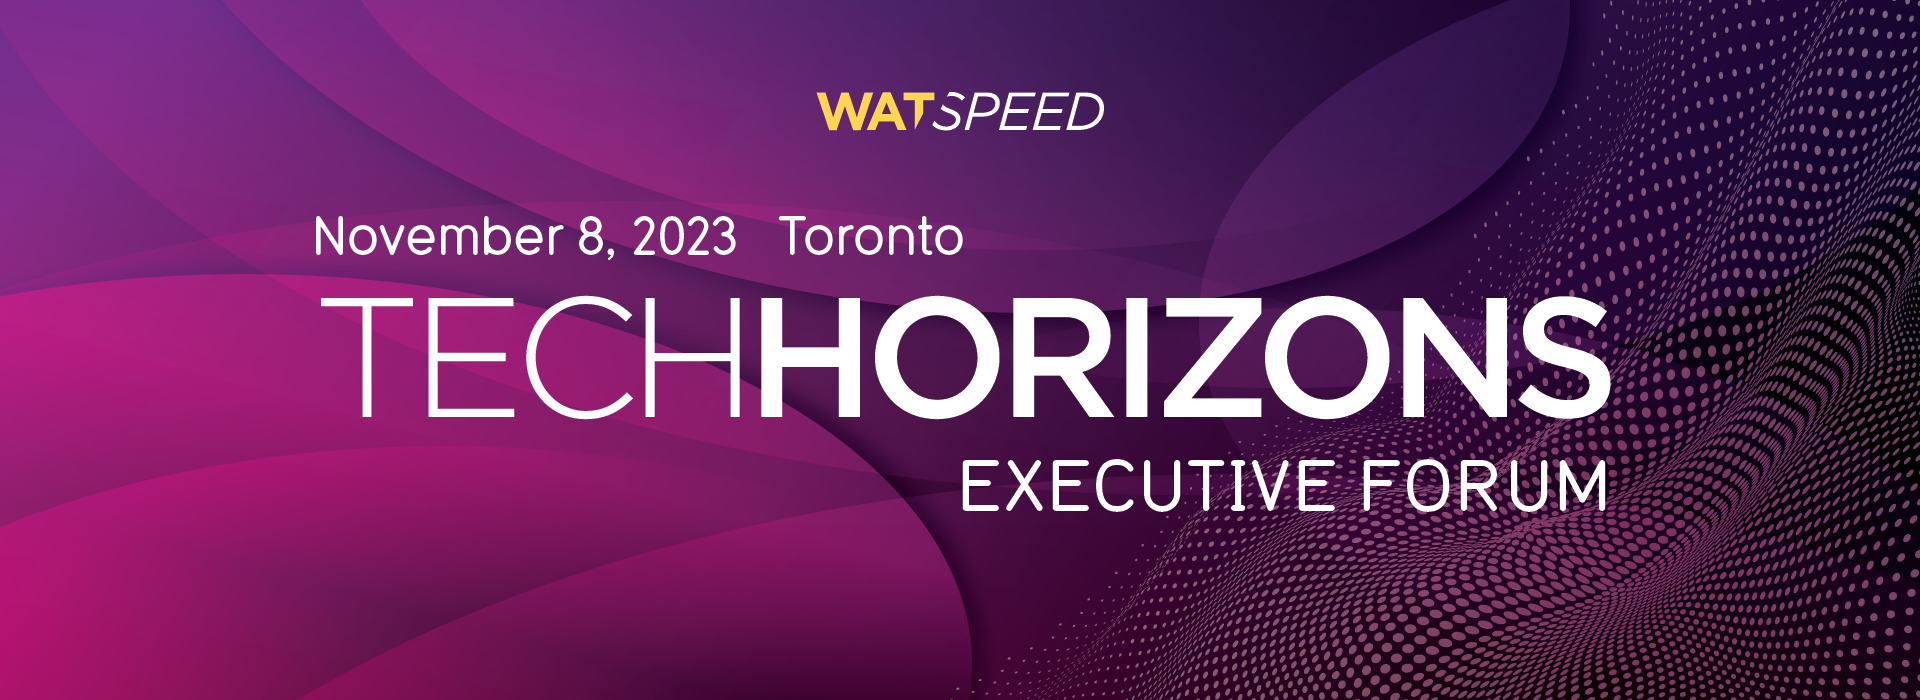 Tech Horizons Executive Forum will take place on November 8 in Toronto